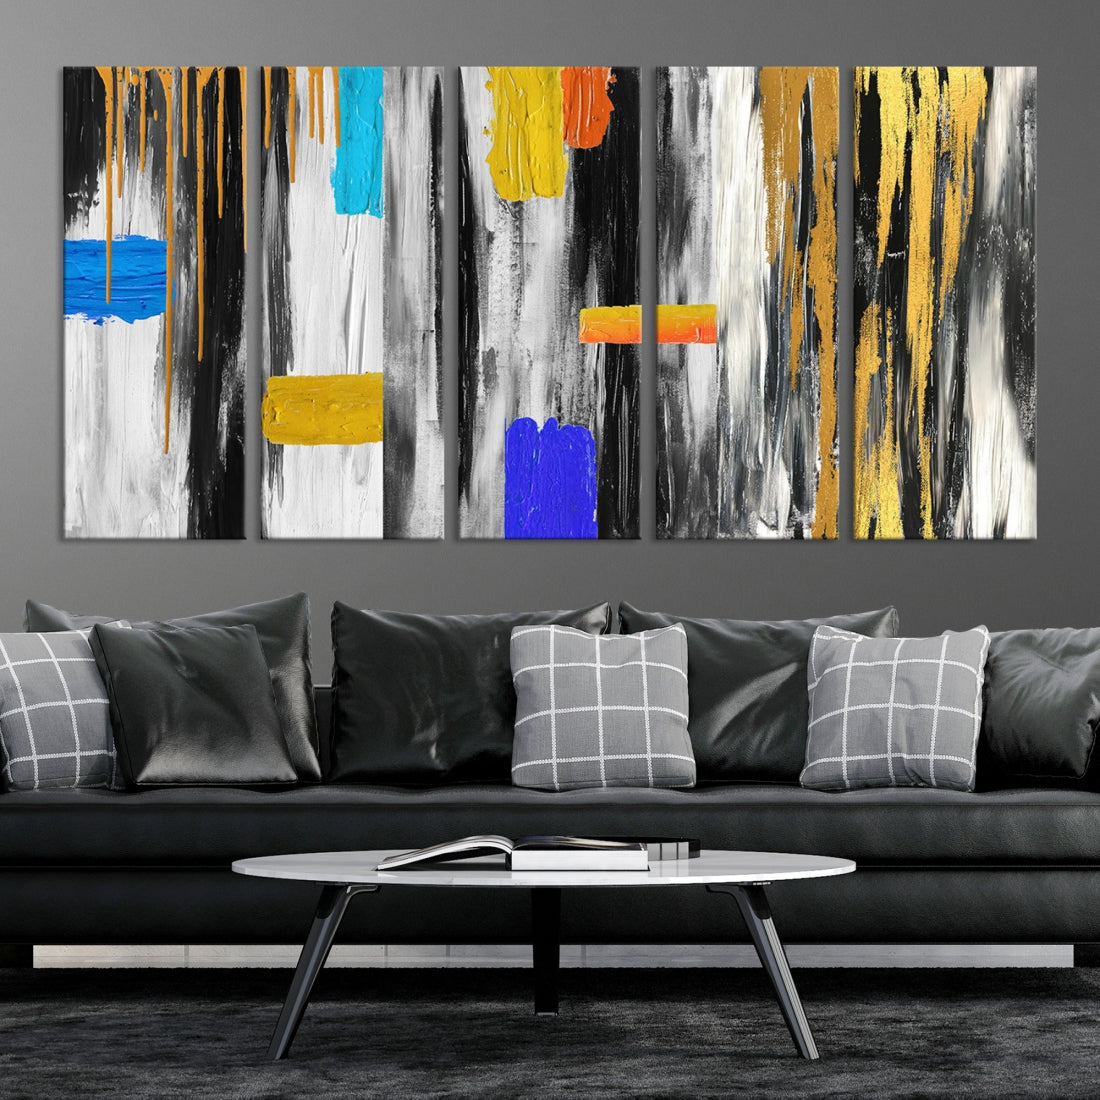 Large Colorful Abstract Painting Modern Canvas Wall Art Bedroom Design